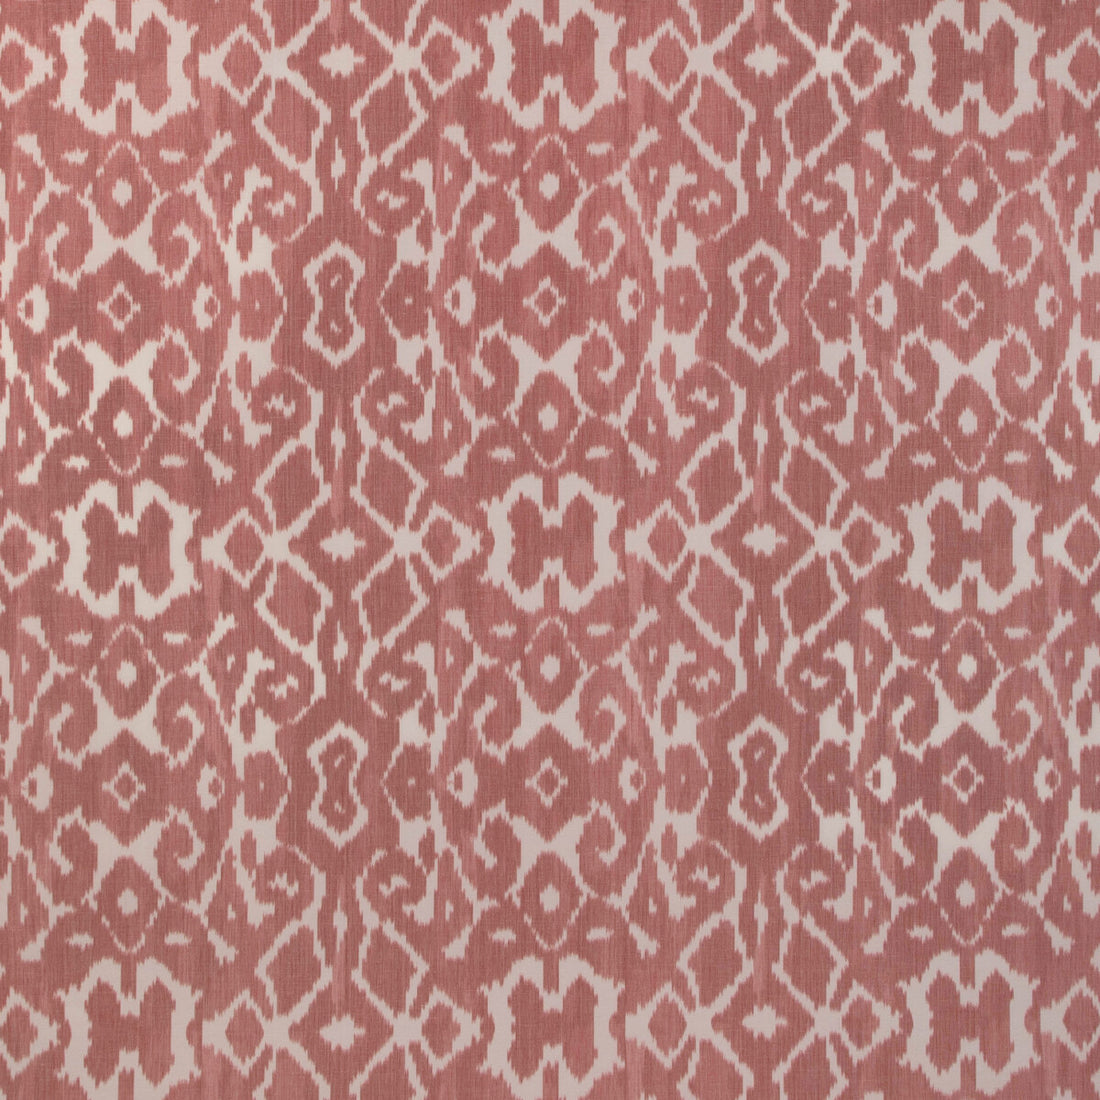 Toponas Print fabric in rose color - pattern 2020206.97.0 - by Lee Jofa in the Clare Prints collection